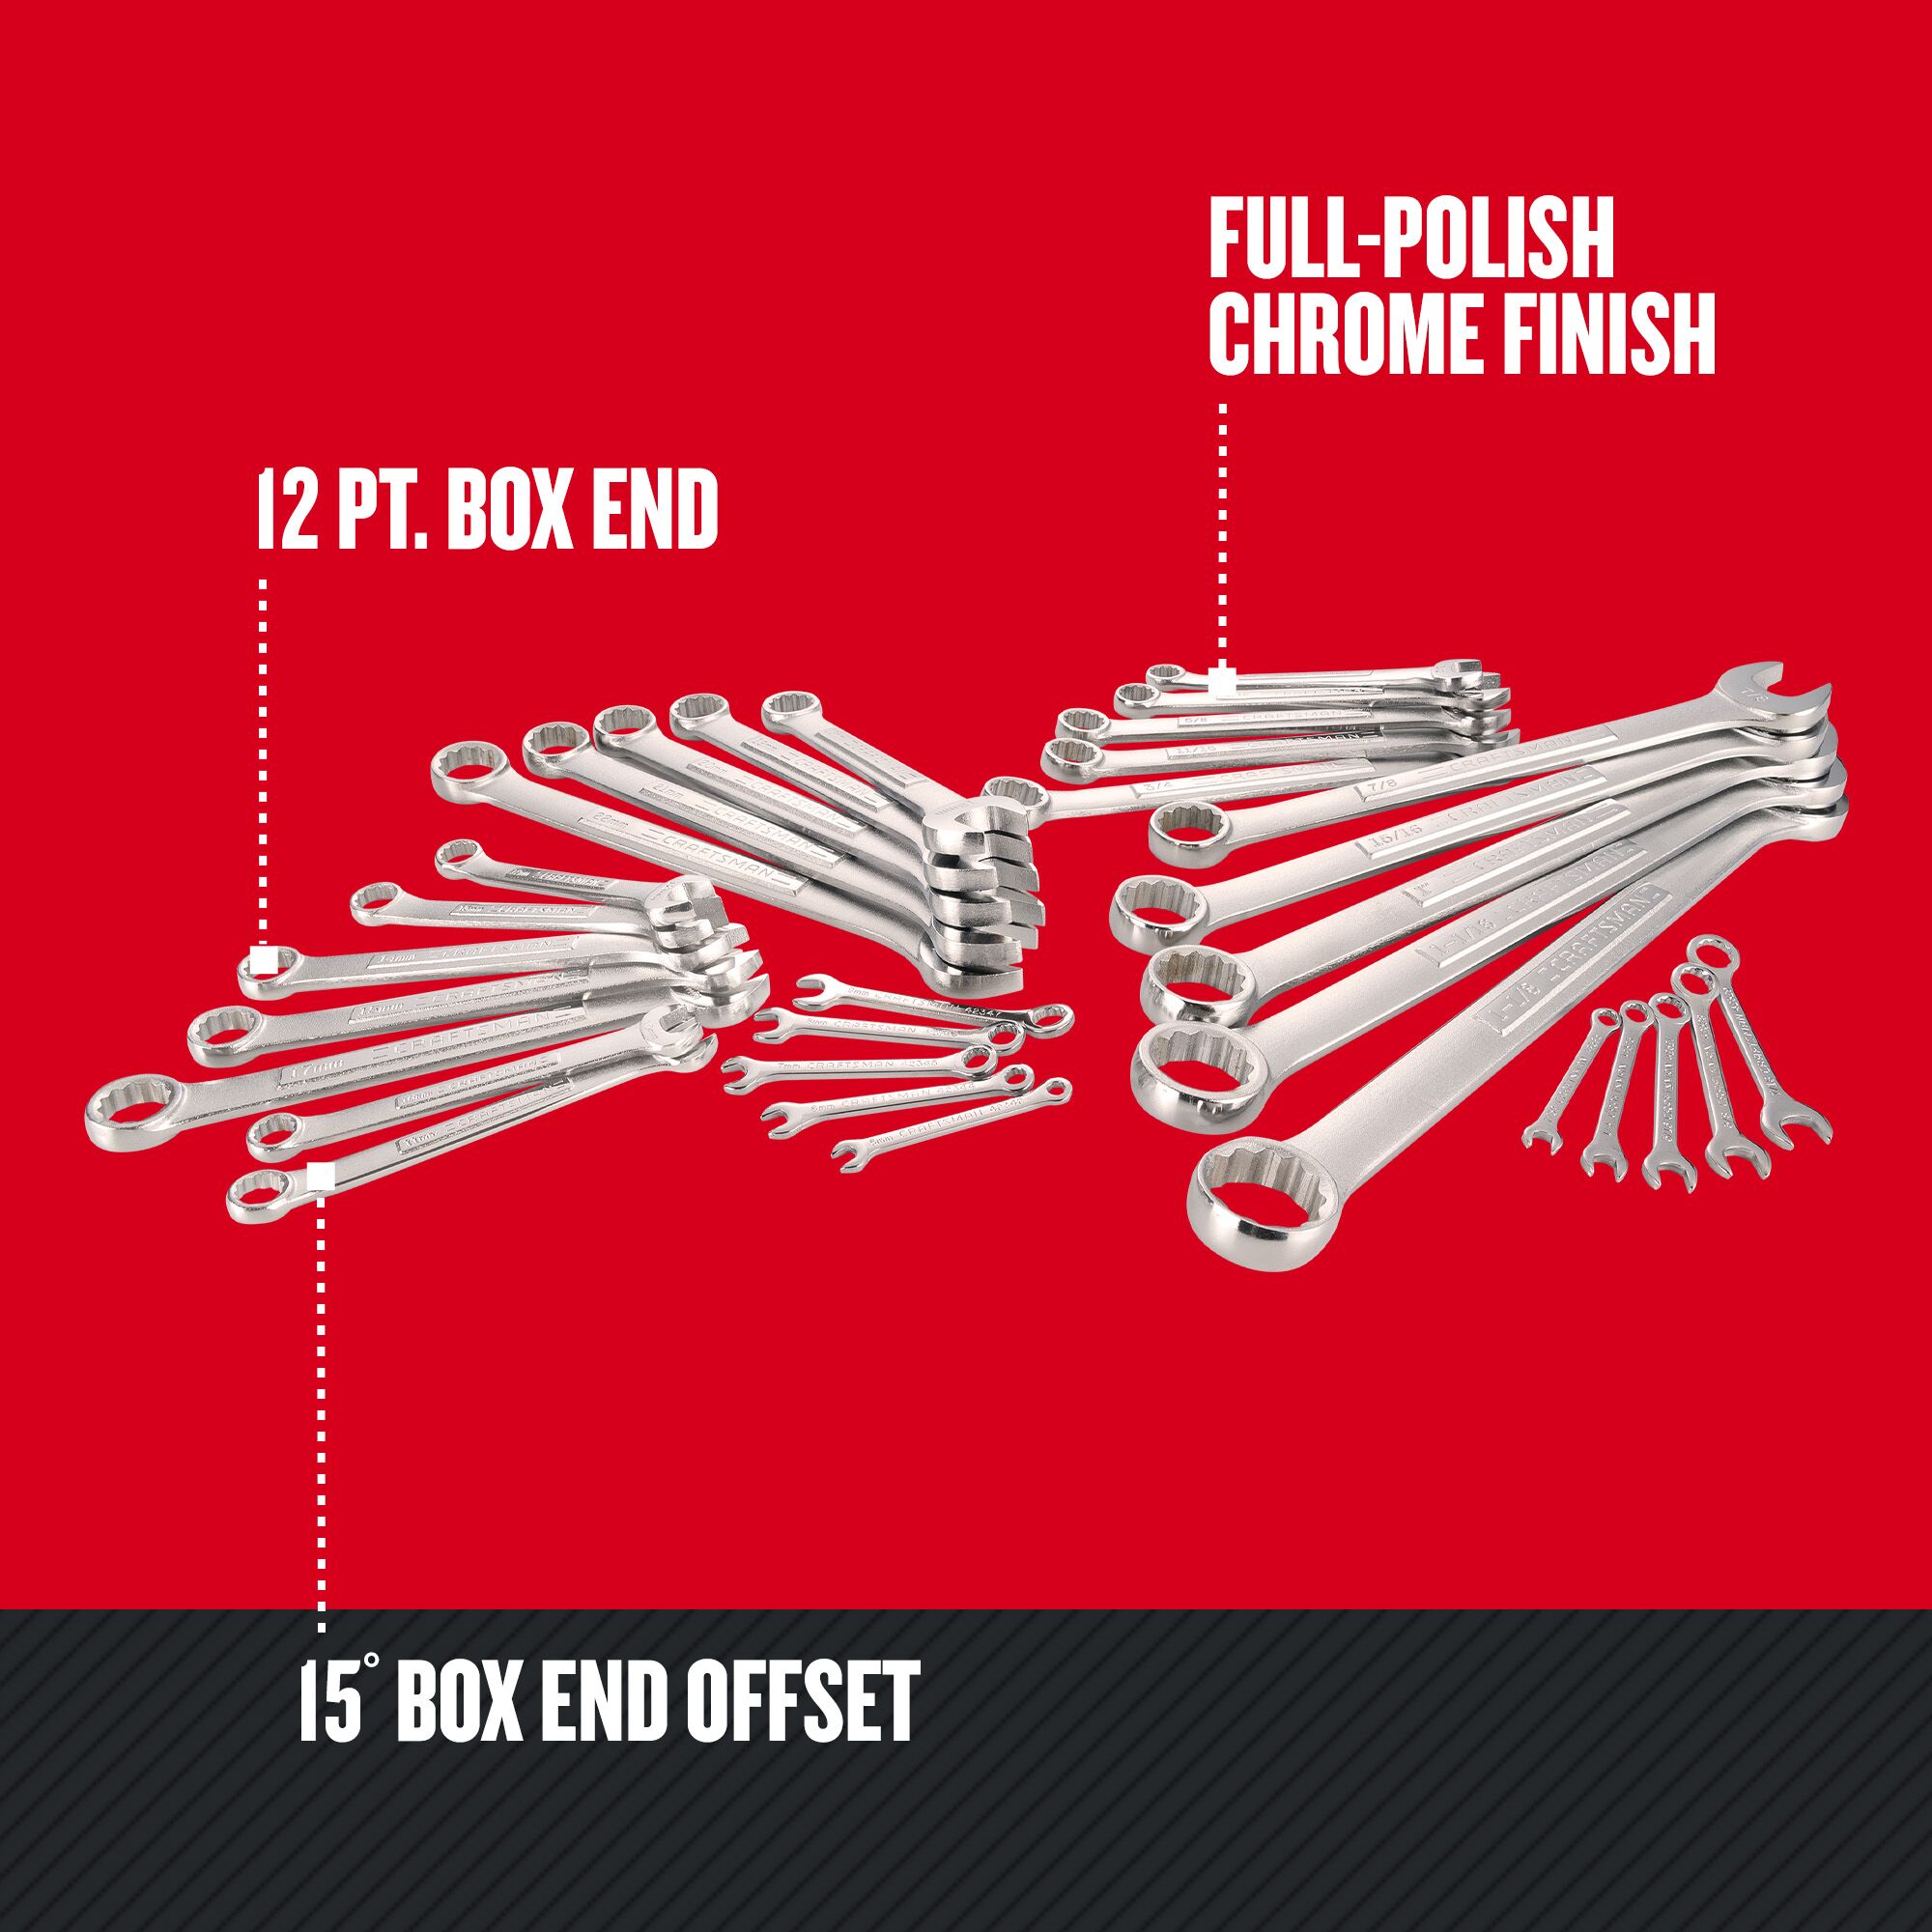 Graphic of CRAFTSMAN Wrenches: Set highlighting product features